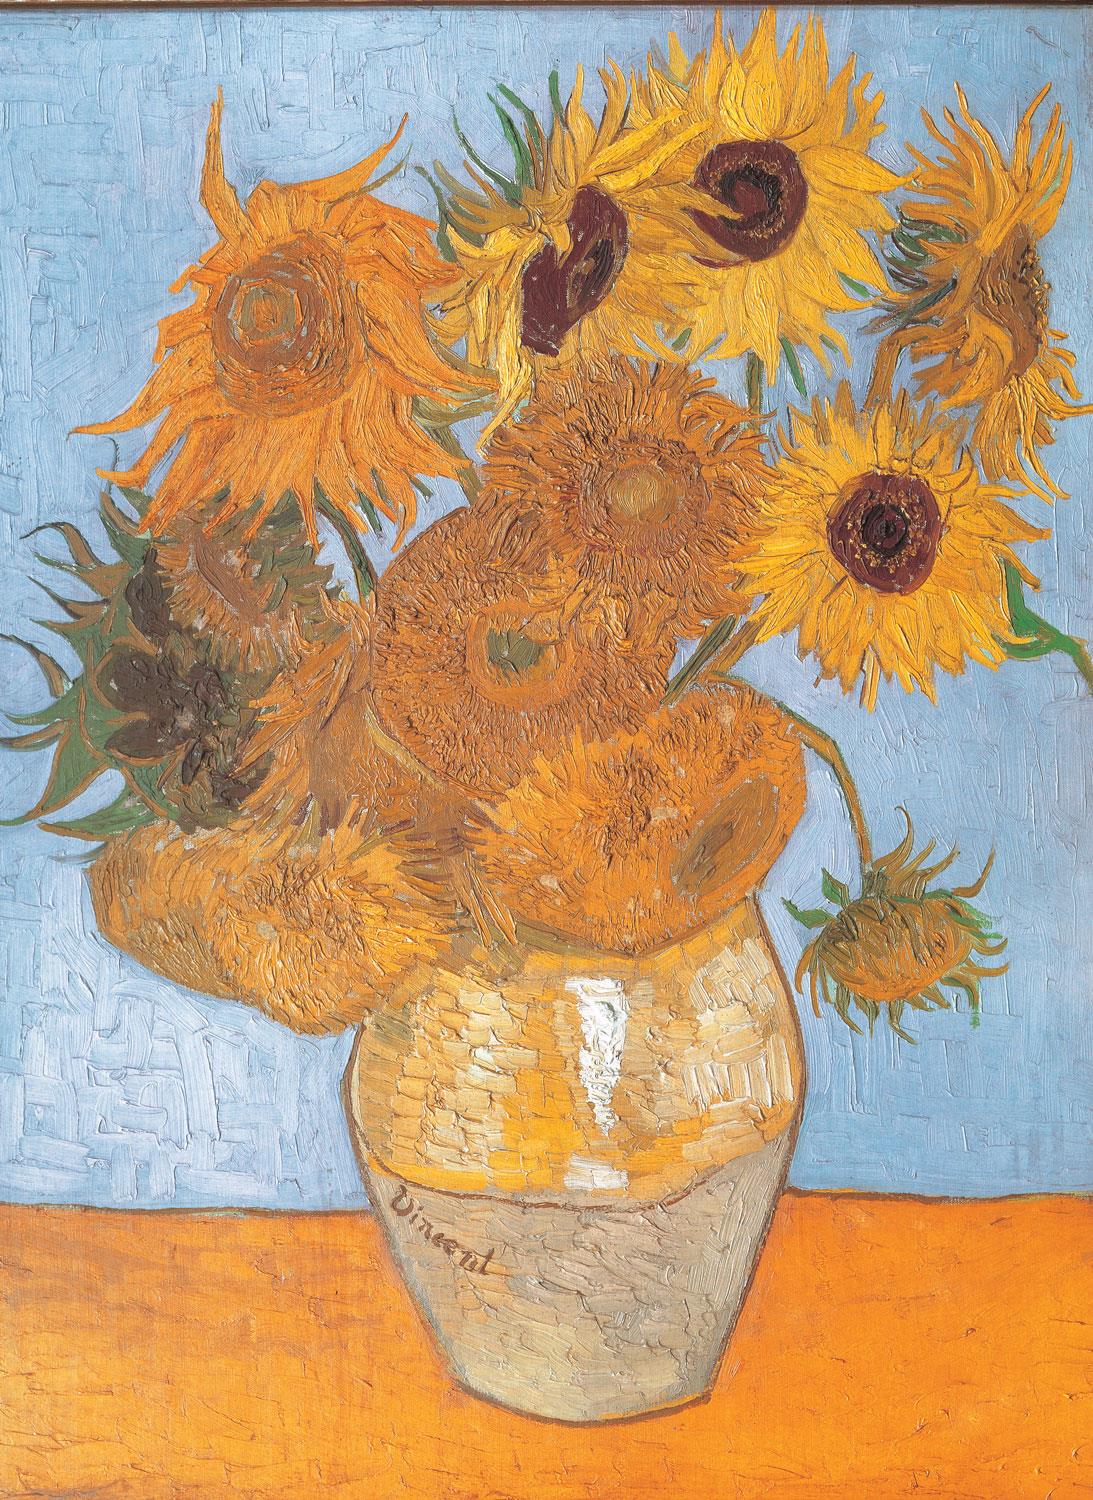 Clementoni Van Gogh Sunflowers High Quality Jigsaw Puzzle (1000 Pieces)